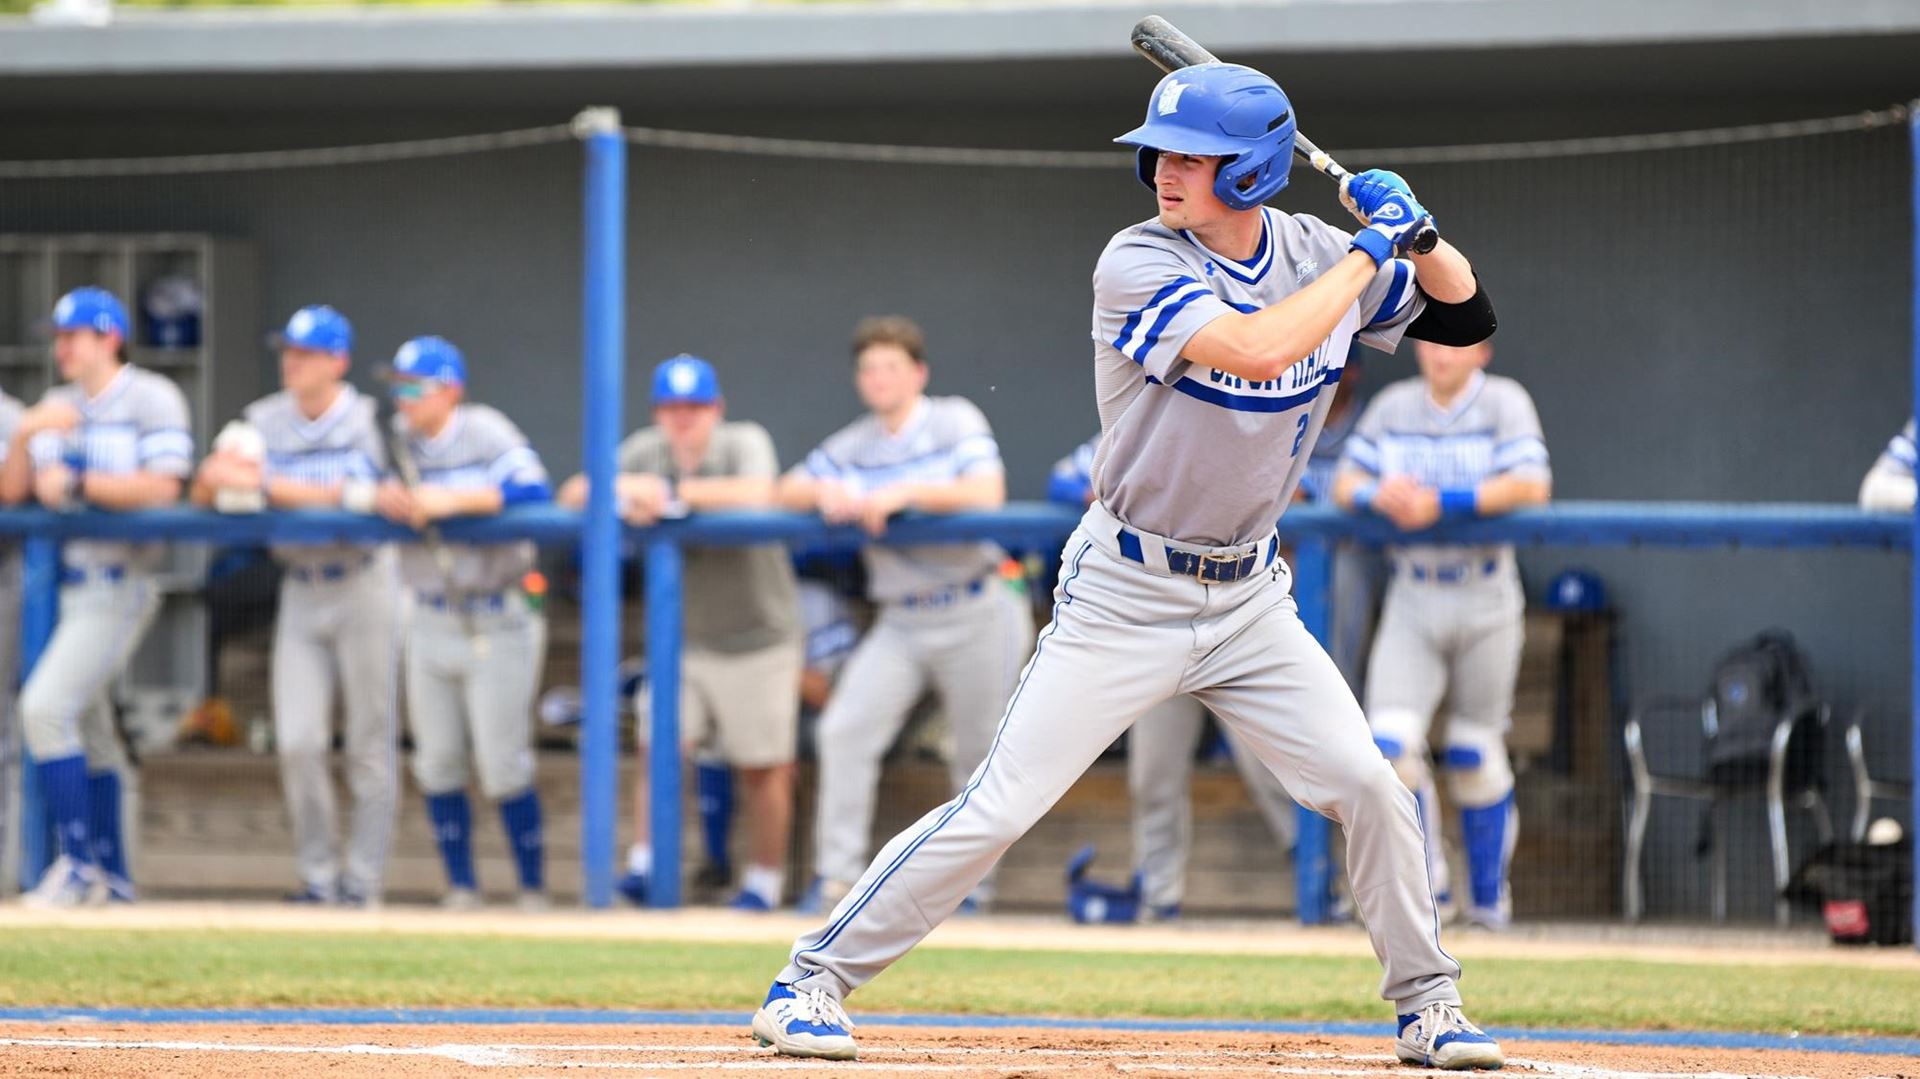 A Seton Hall batter looks to hit during a game.